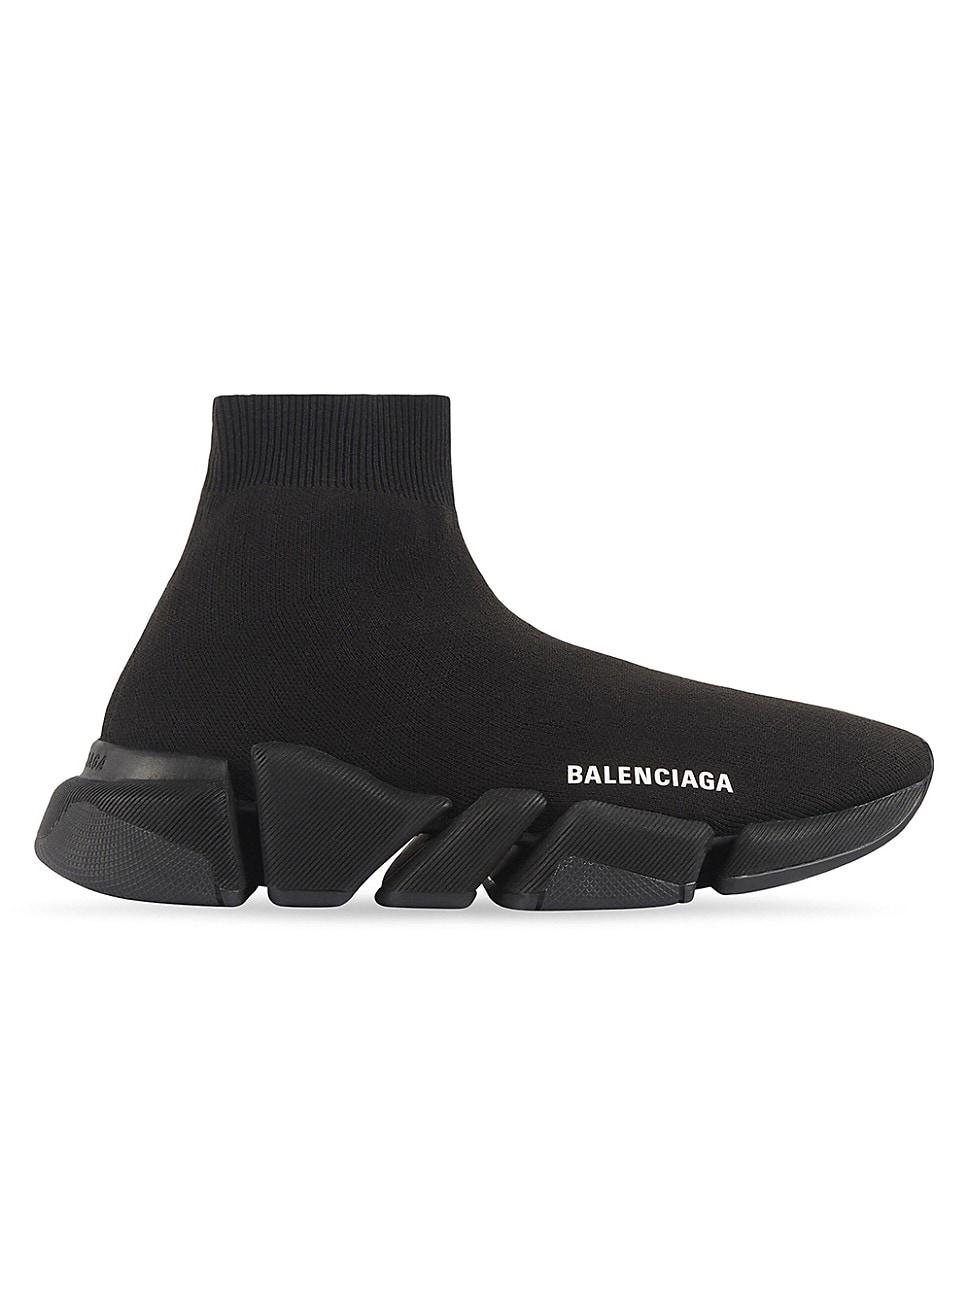 Balenciaga Speed 2.0 Recycled Knit Sneaker in Black | Lyst